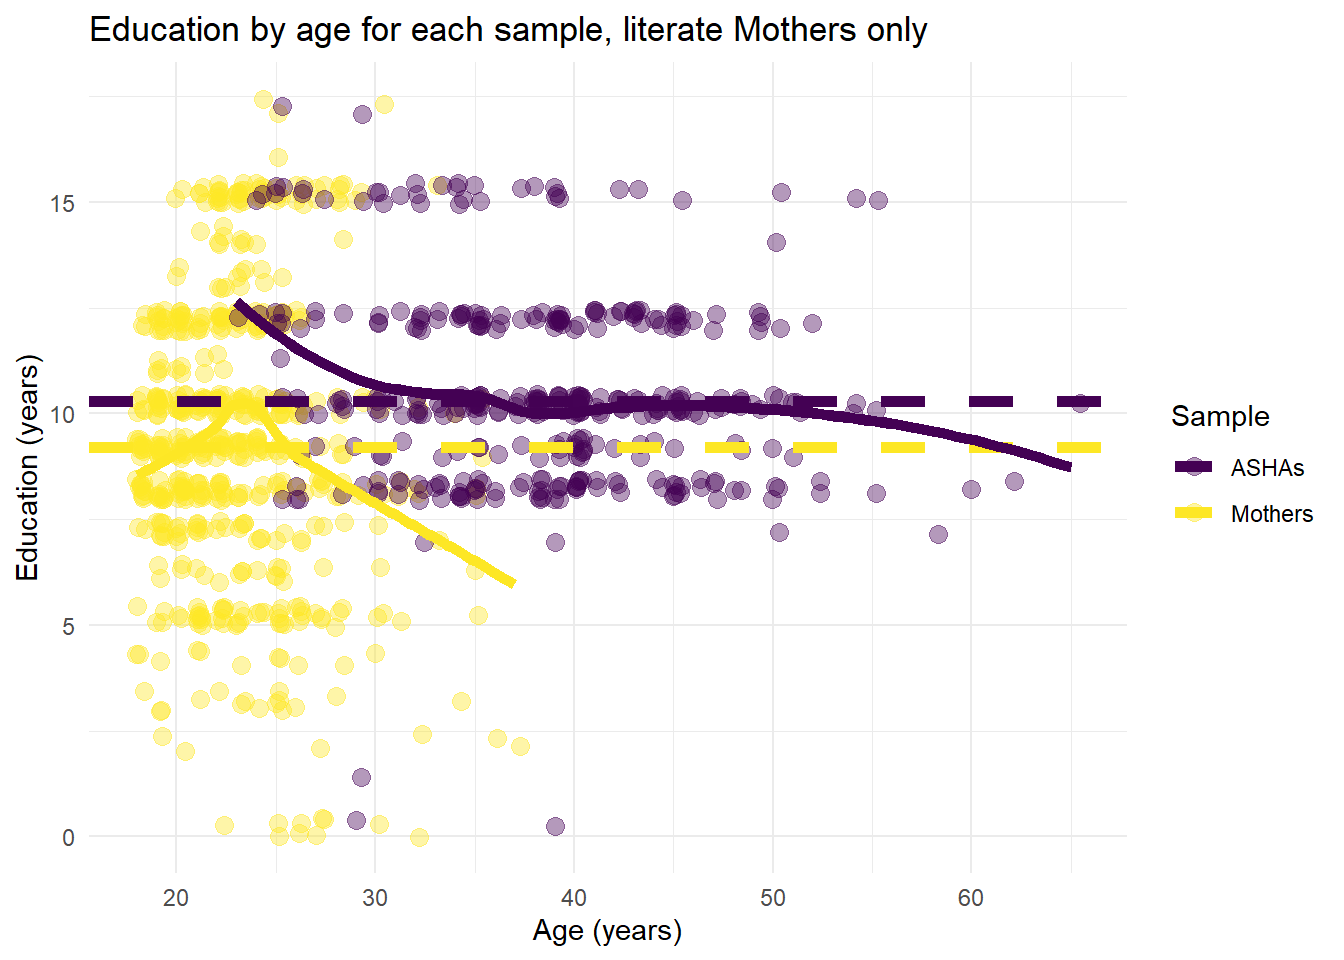 Education by age comparing Mother and ASHA samples, literate Mothers only. The dotted lines are sample means.